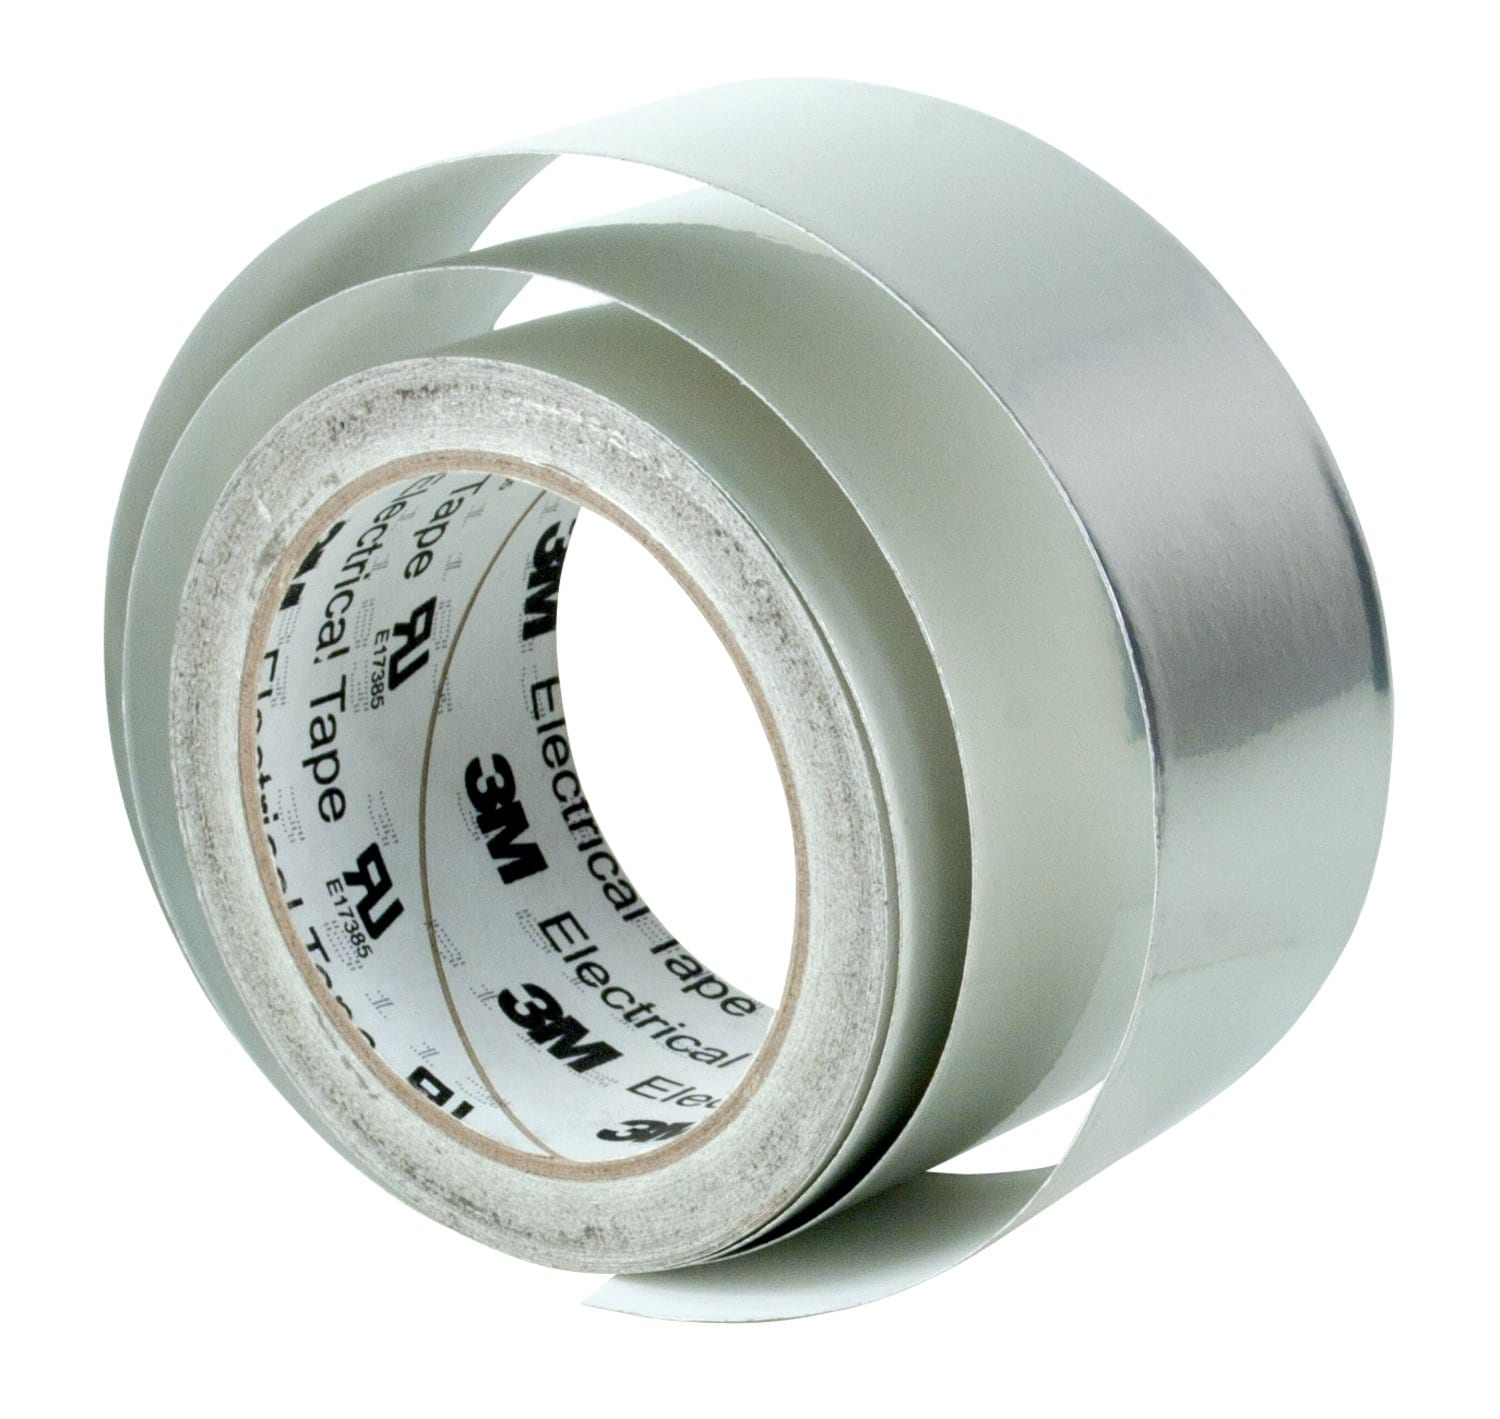 3M™ Wrap Repair Silicone Tape 03625, 1 in x 6 ft, 24 Roll/Case